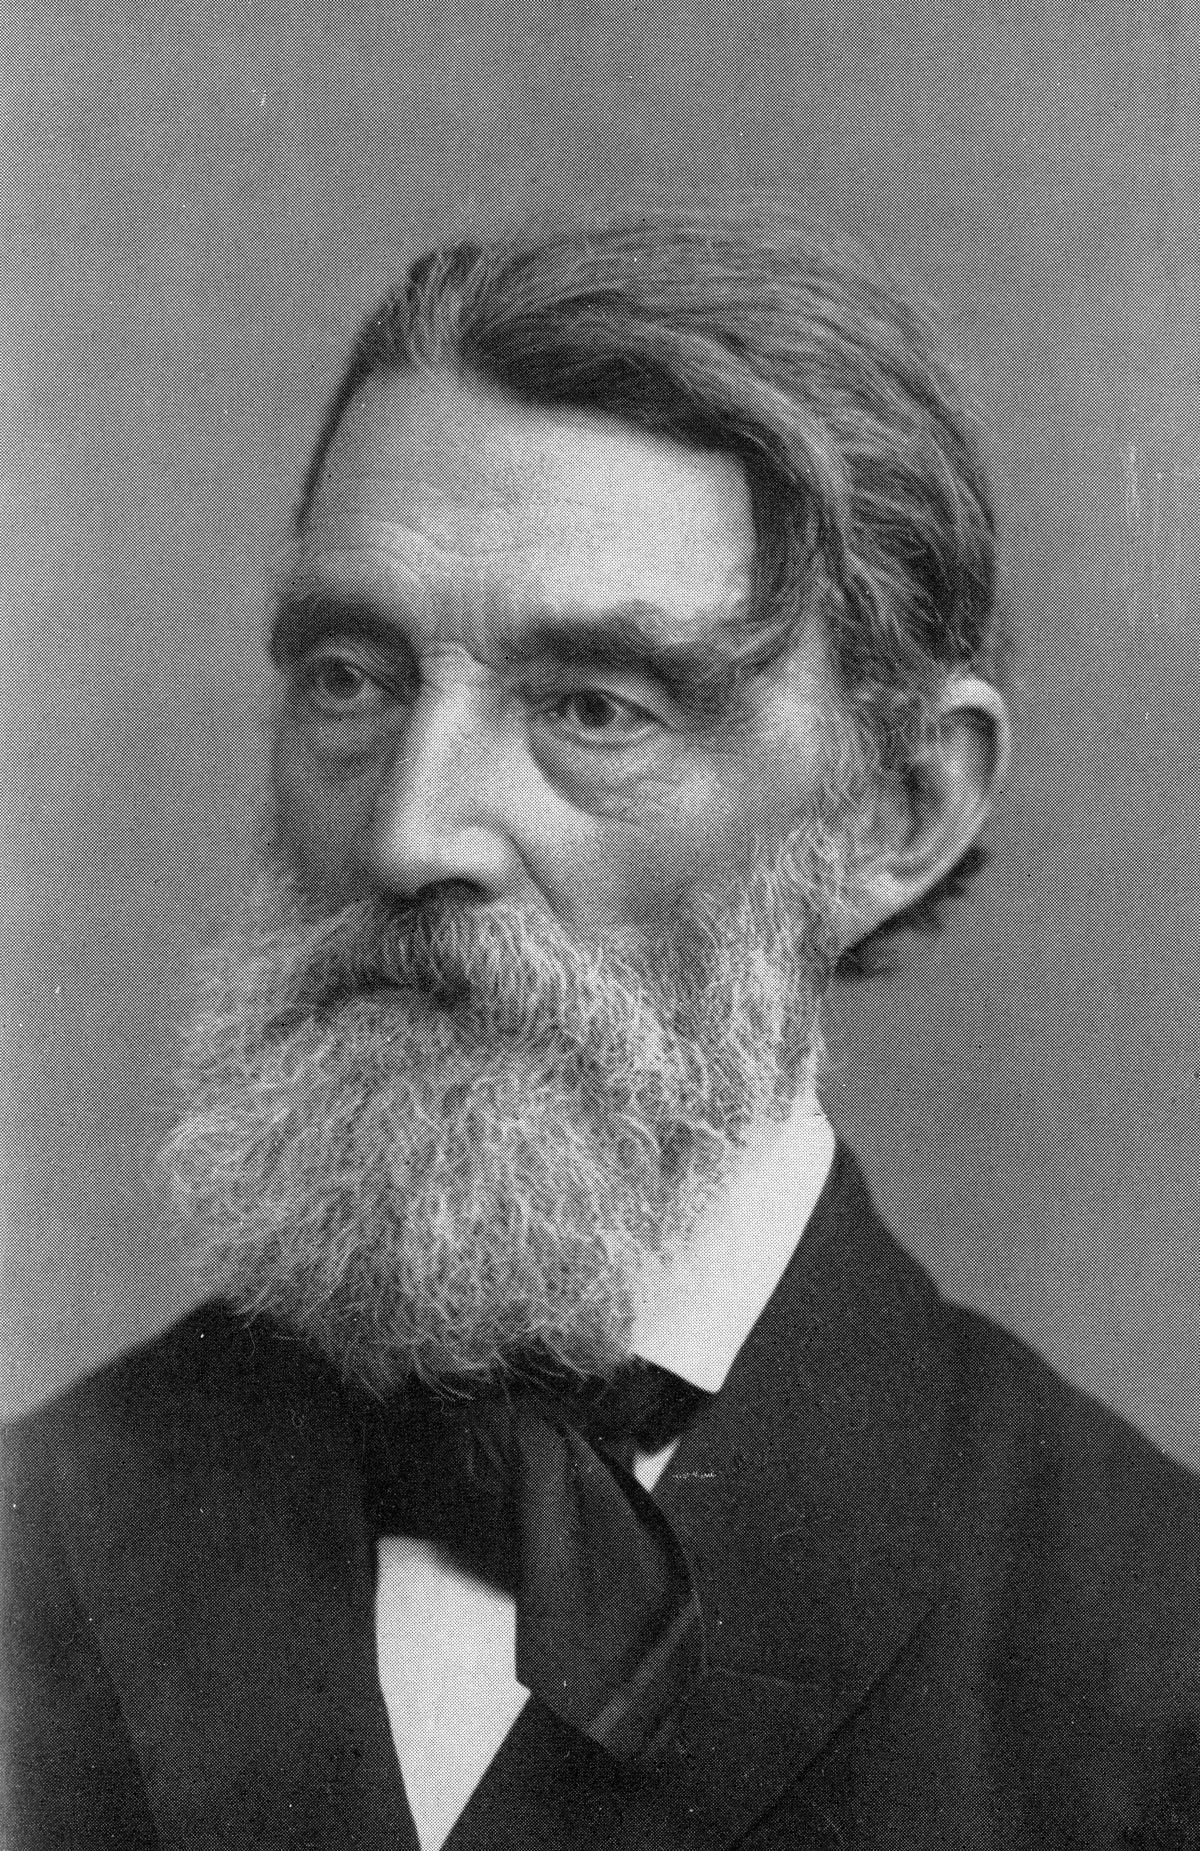 Johan Sverdrup, Liberal prime minister from 1884 who introduced the parliamentary system and thus stripped the Swedish king of most of his power.